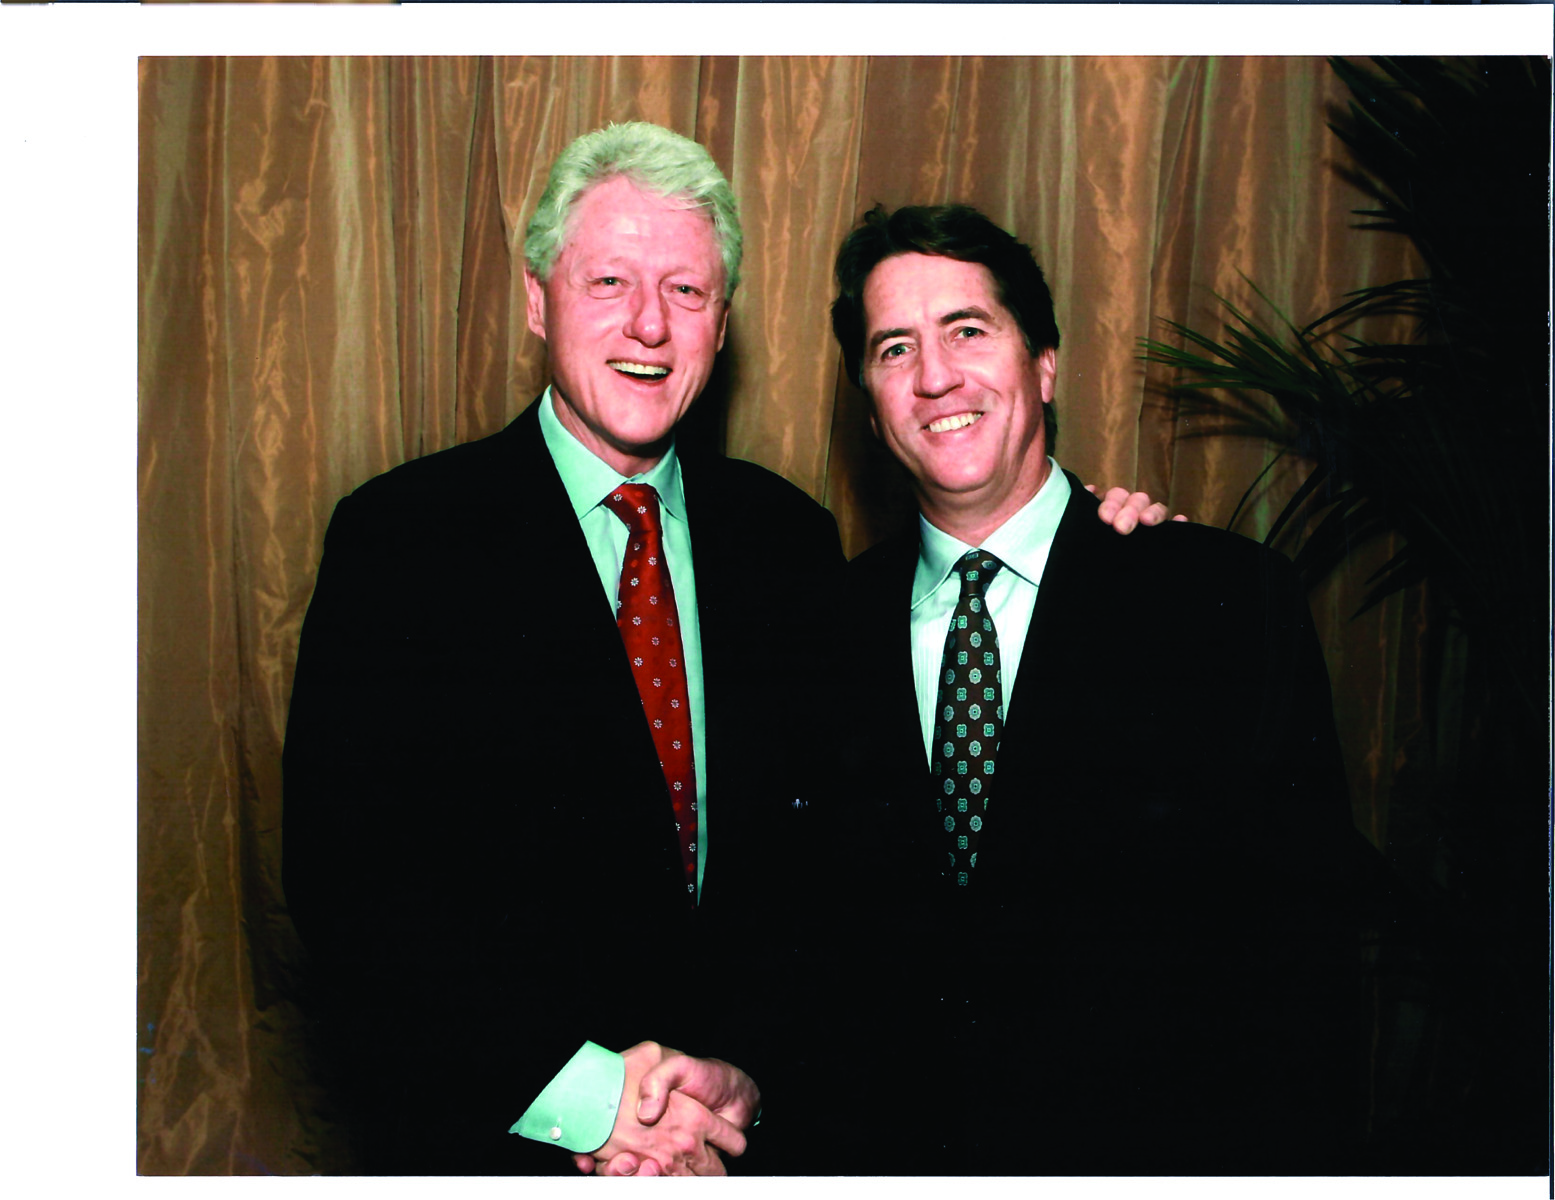 President Clinton with Candaele, with whom he talked about the Good Friday Agreement several times after he left the Presidency.